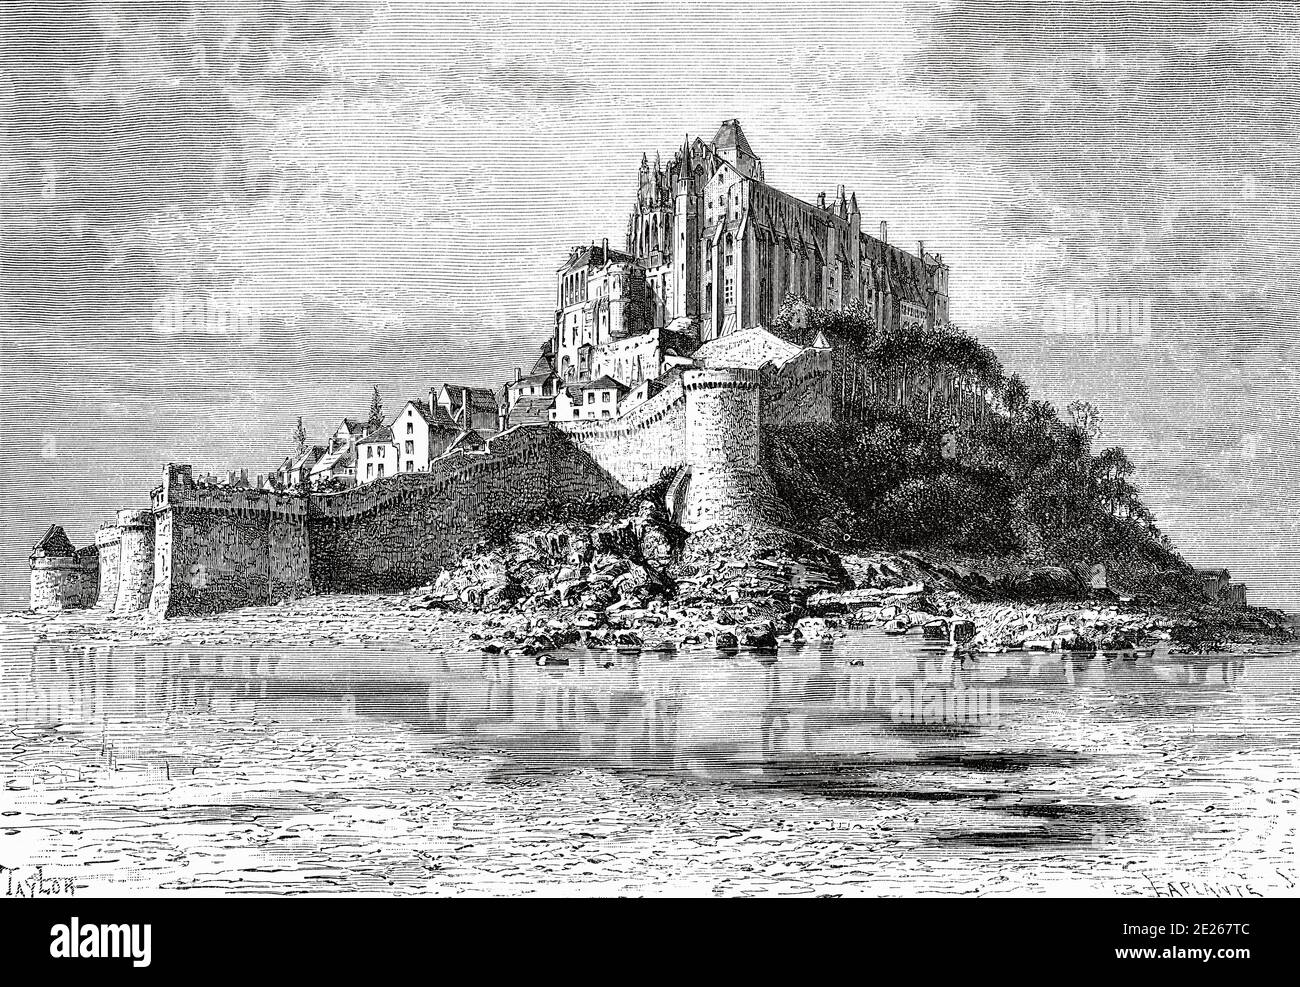 Le Mont Saint-Michel before the construction of the dike, island north coast of France Normandy. France Europe. Old 19th century engraved illustration image from the book New Universal Geography by Eliseo Reclus 1889 Stock Photo